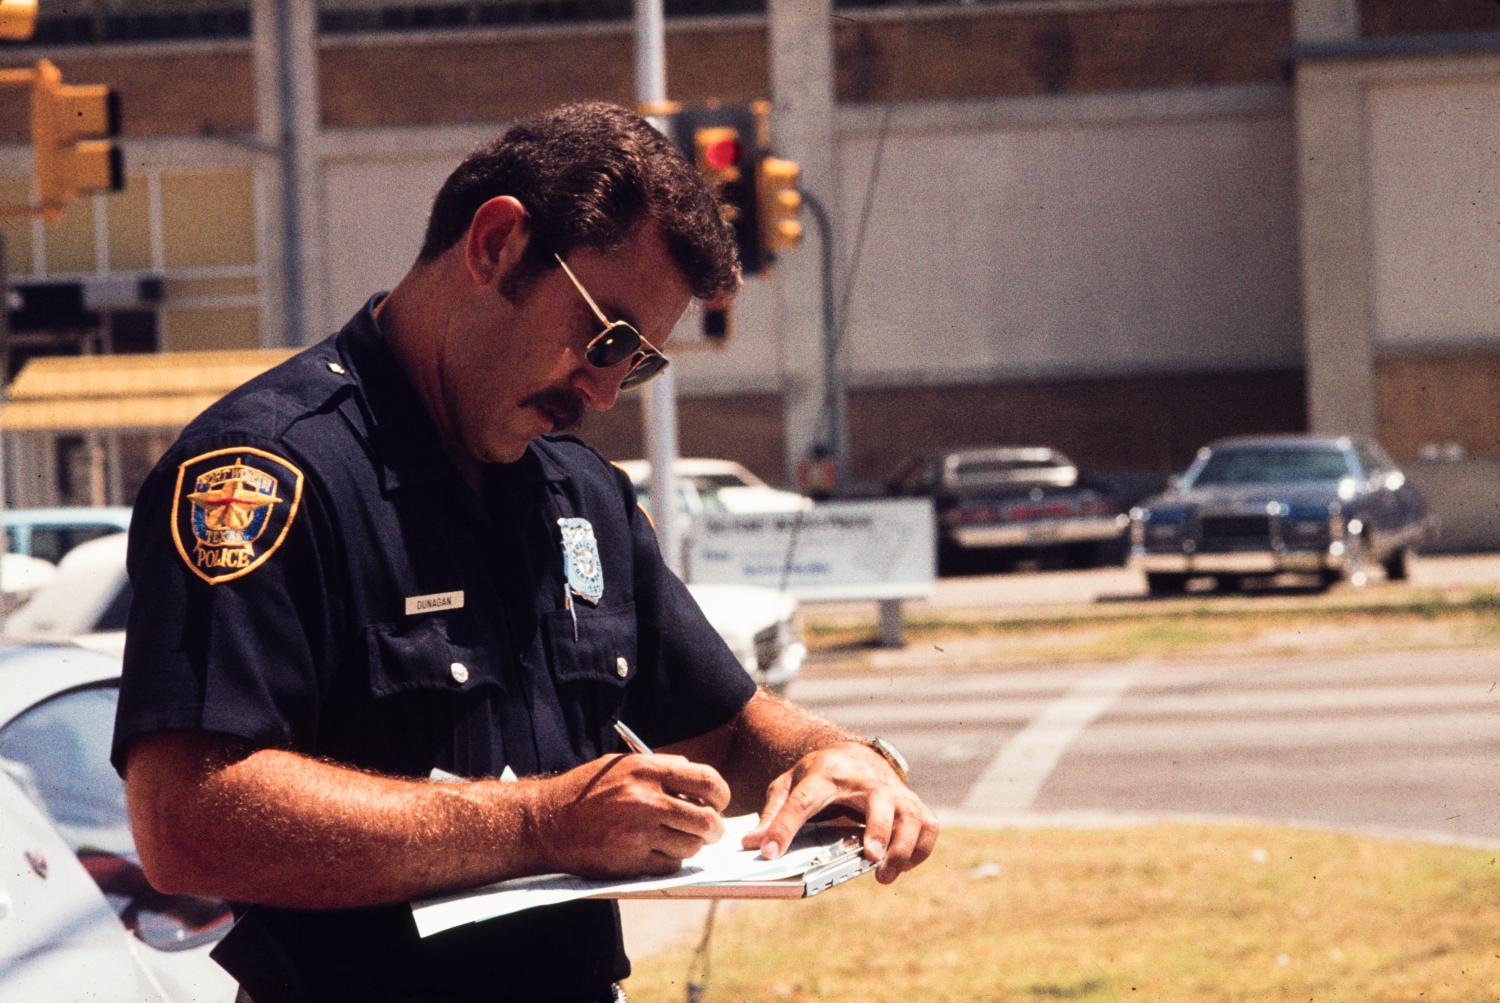 [Police officer writing, 2]